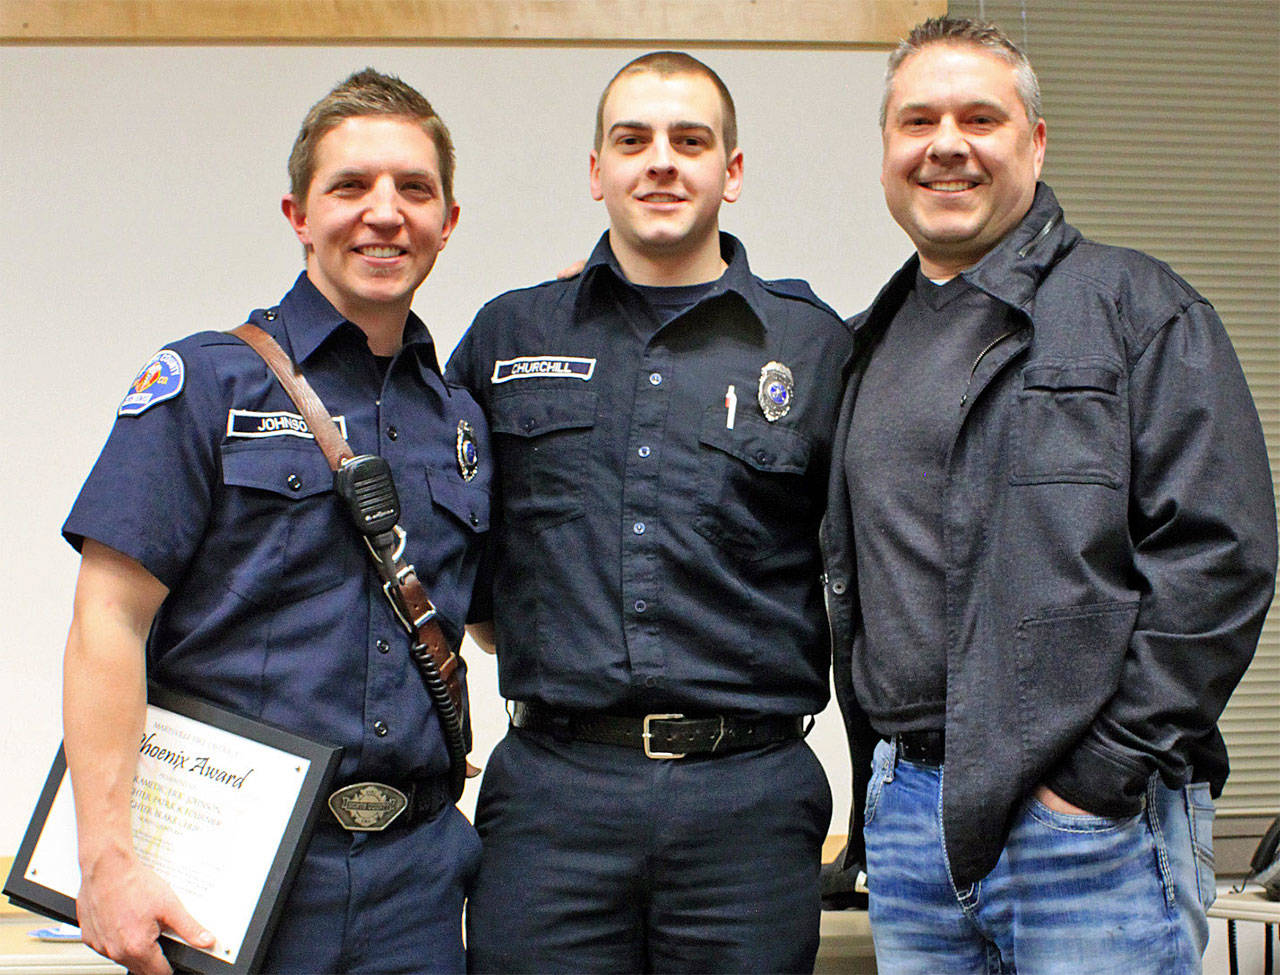 North County paramedic Eric Johnson (from left) and firefighter Blake Churchill were honored with the Marysville Fire District’s Phoenix Award for helping to save the life of Marysville Fire District paramedic Kevin Johnson. North County firefighter Patrick Fournier (not pictured) also was honored. (Contributed photo)